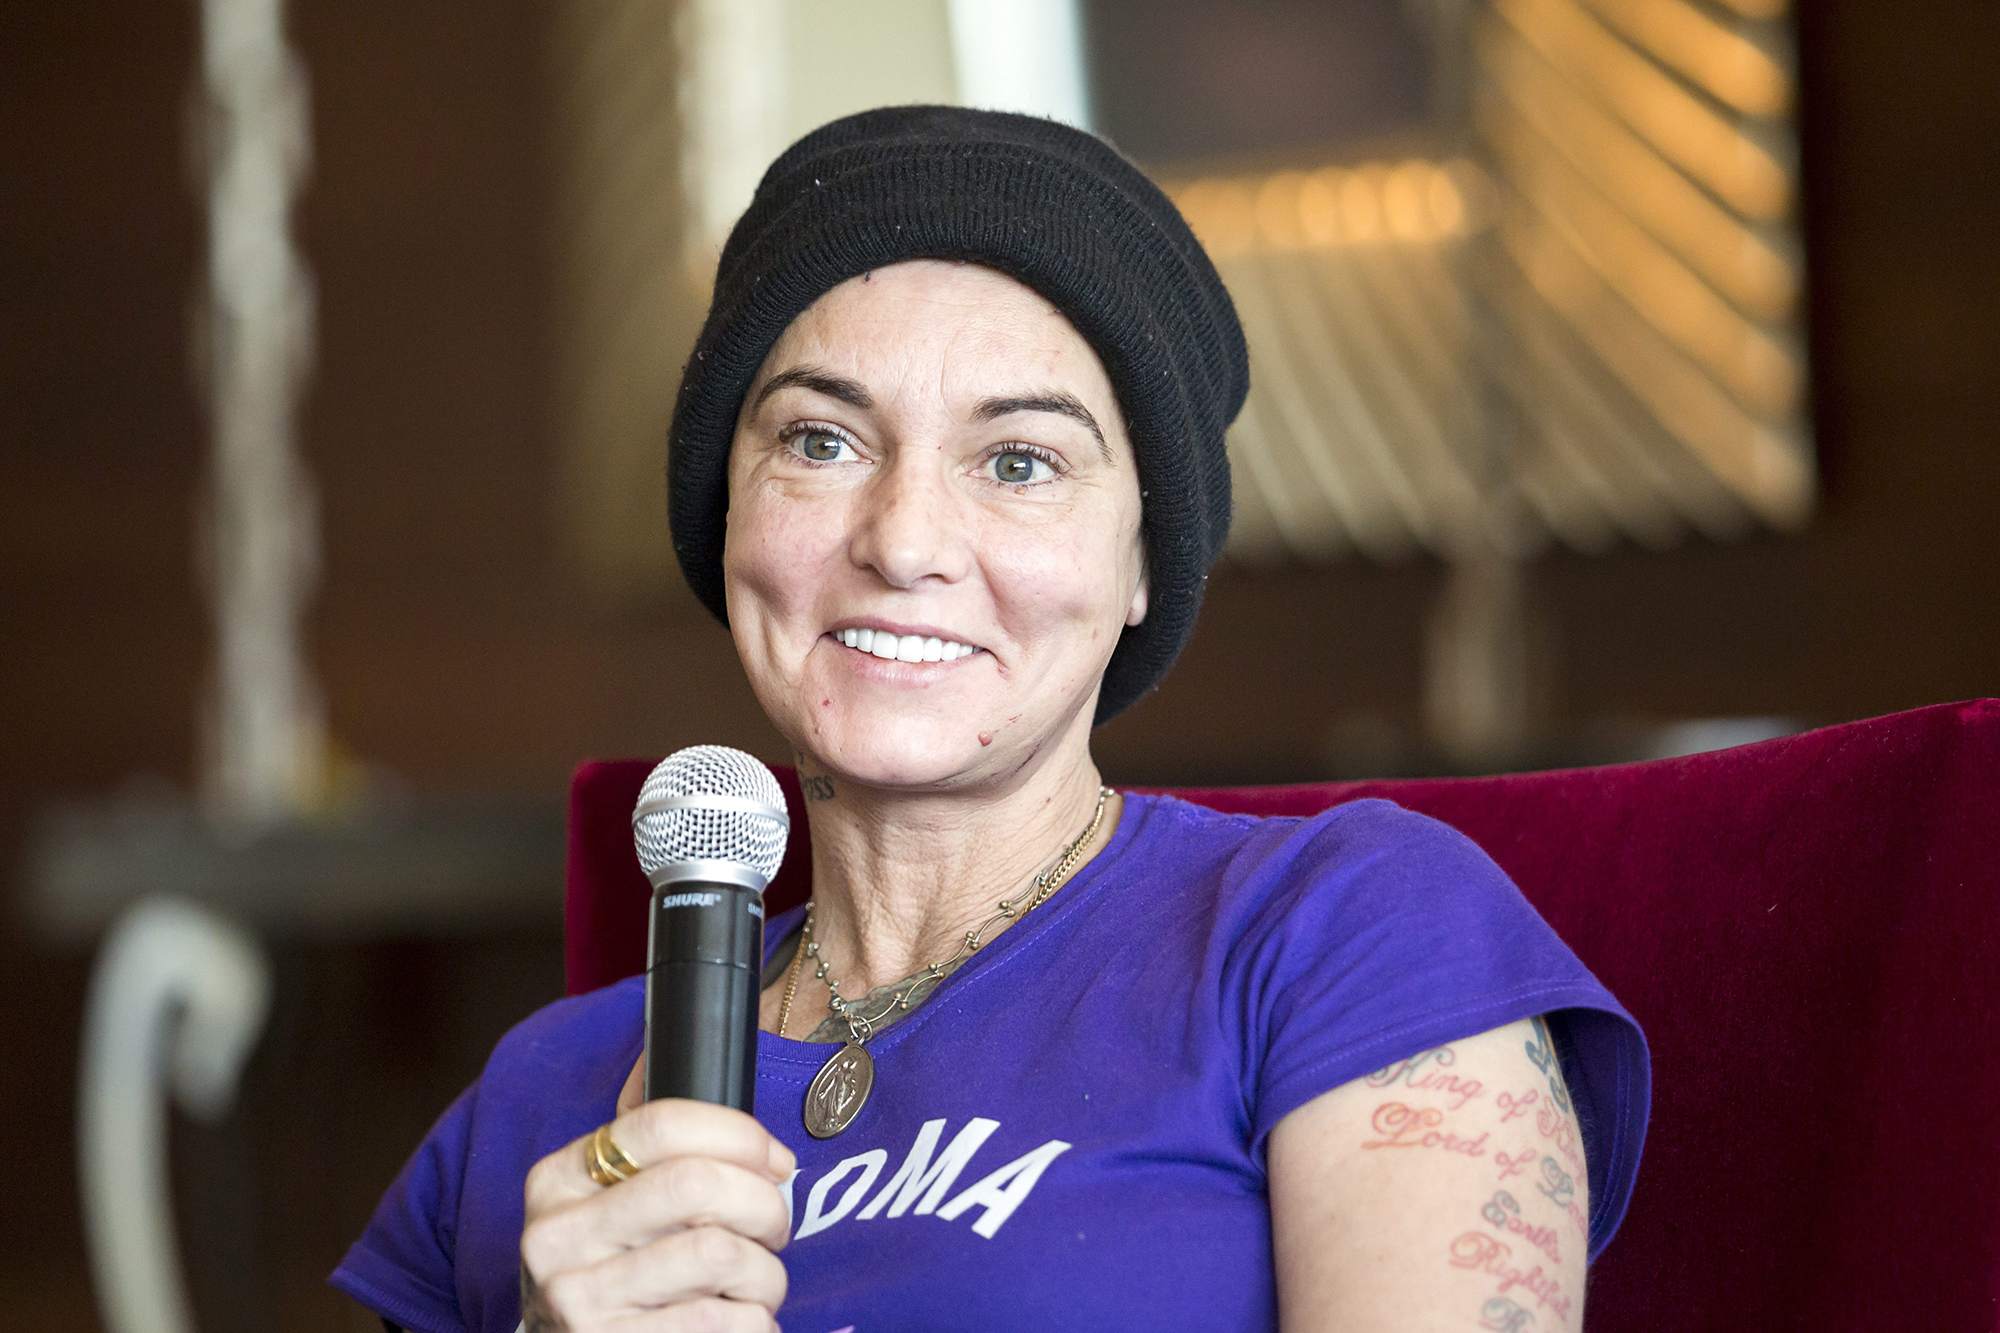 Sinead O'Connor's Family Guide: Meet Her 4 Children and Their Fathers